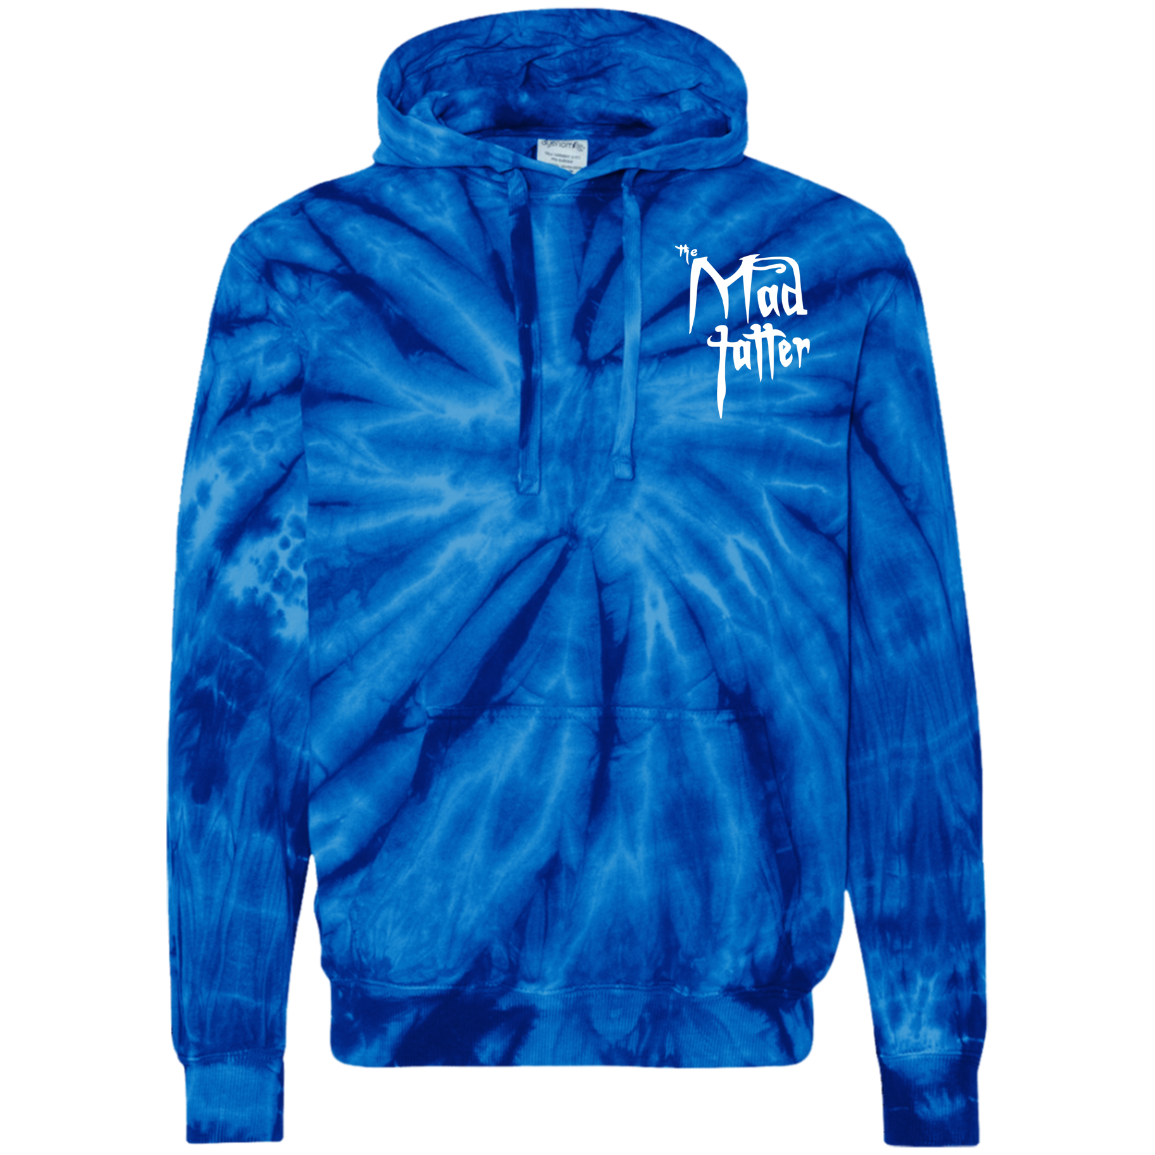 Mad Tatter Tie-Dyed Pullover Hoodie - White Logo